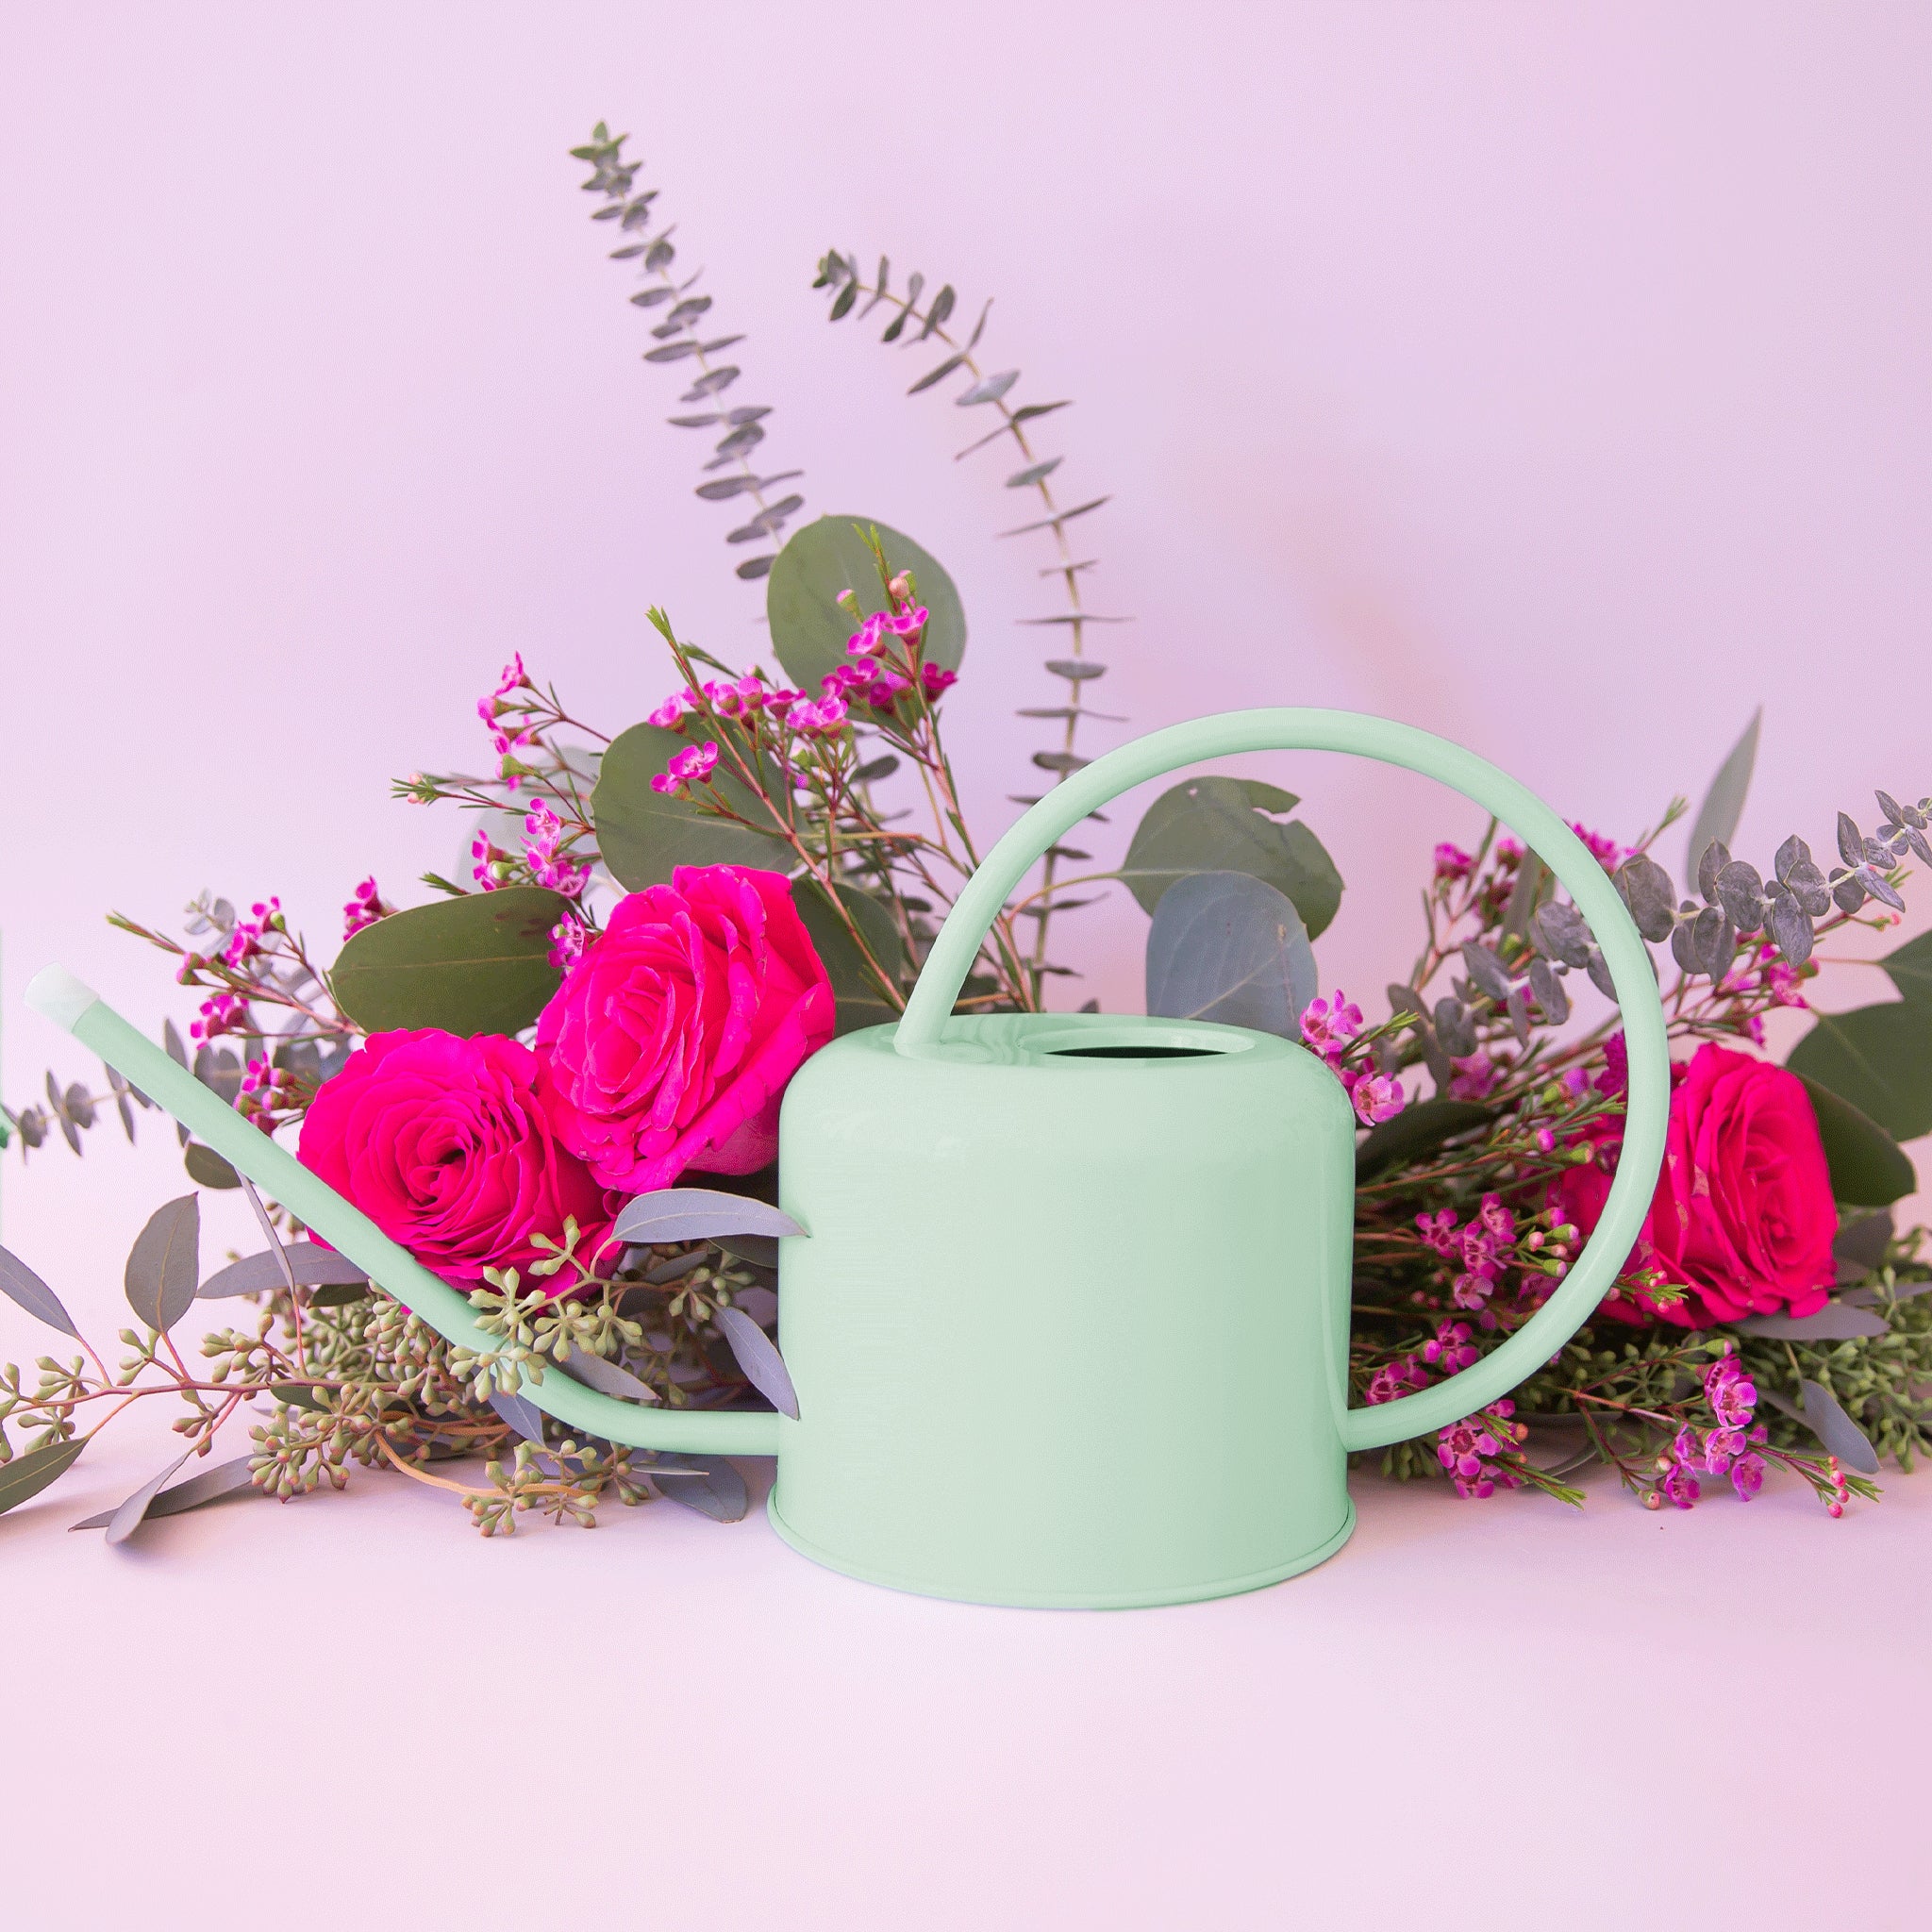 On a pink background is a light blue watering can with a long spout and a rounded handle.